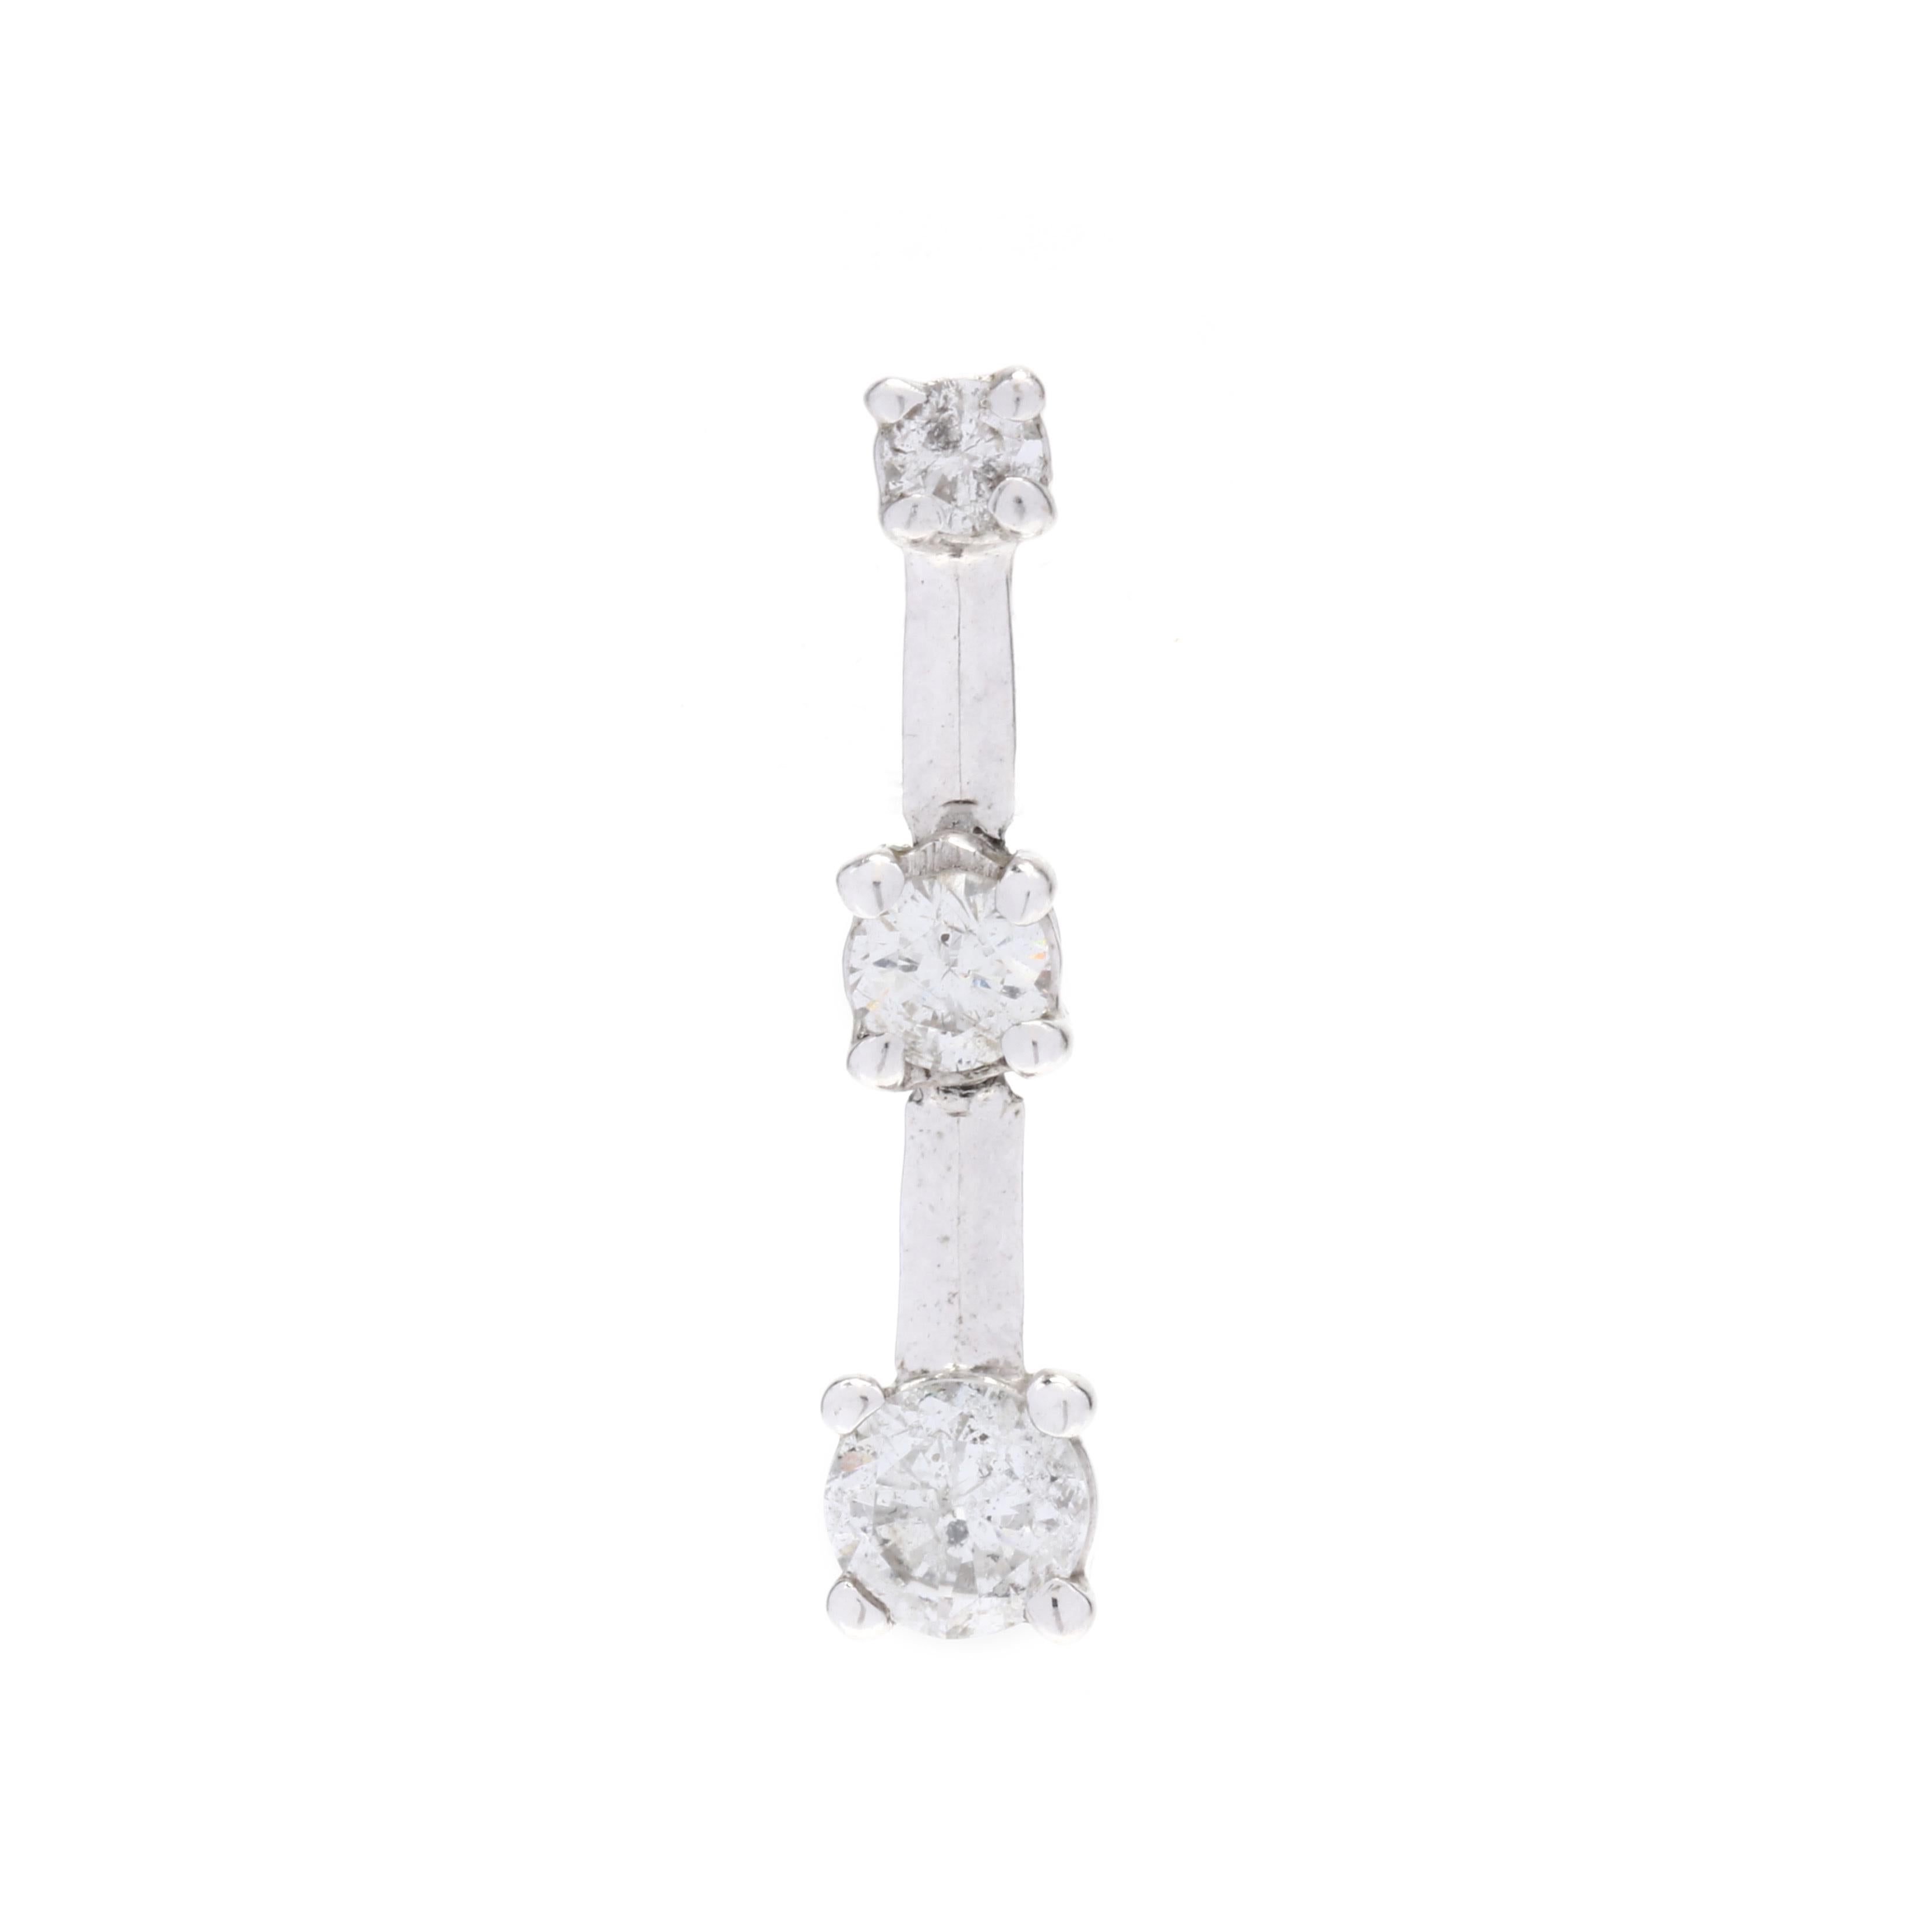 A pair of 14 karat white gold triple diamond earrings. These earrings feature a linear dangle design each set with 3 full cut round diamonds weighing approximately .50 total carats and with pierced post backs.



Stones:

- diamonds, 6 stones

-